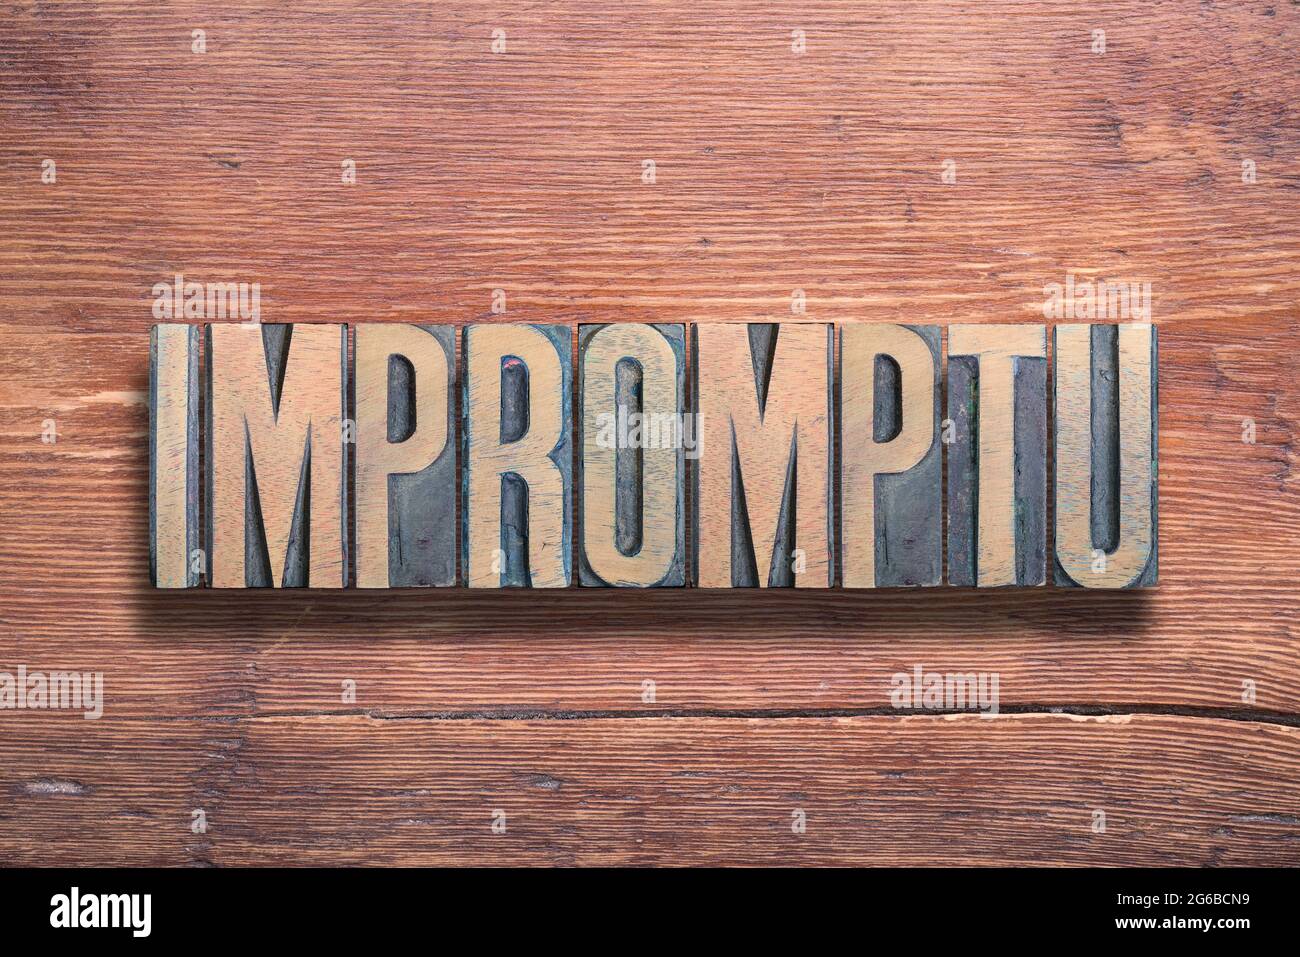 impromptu word ancient Latin word meaning - spontaneous, combined on vintage varnished wooden surface Stock Photo